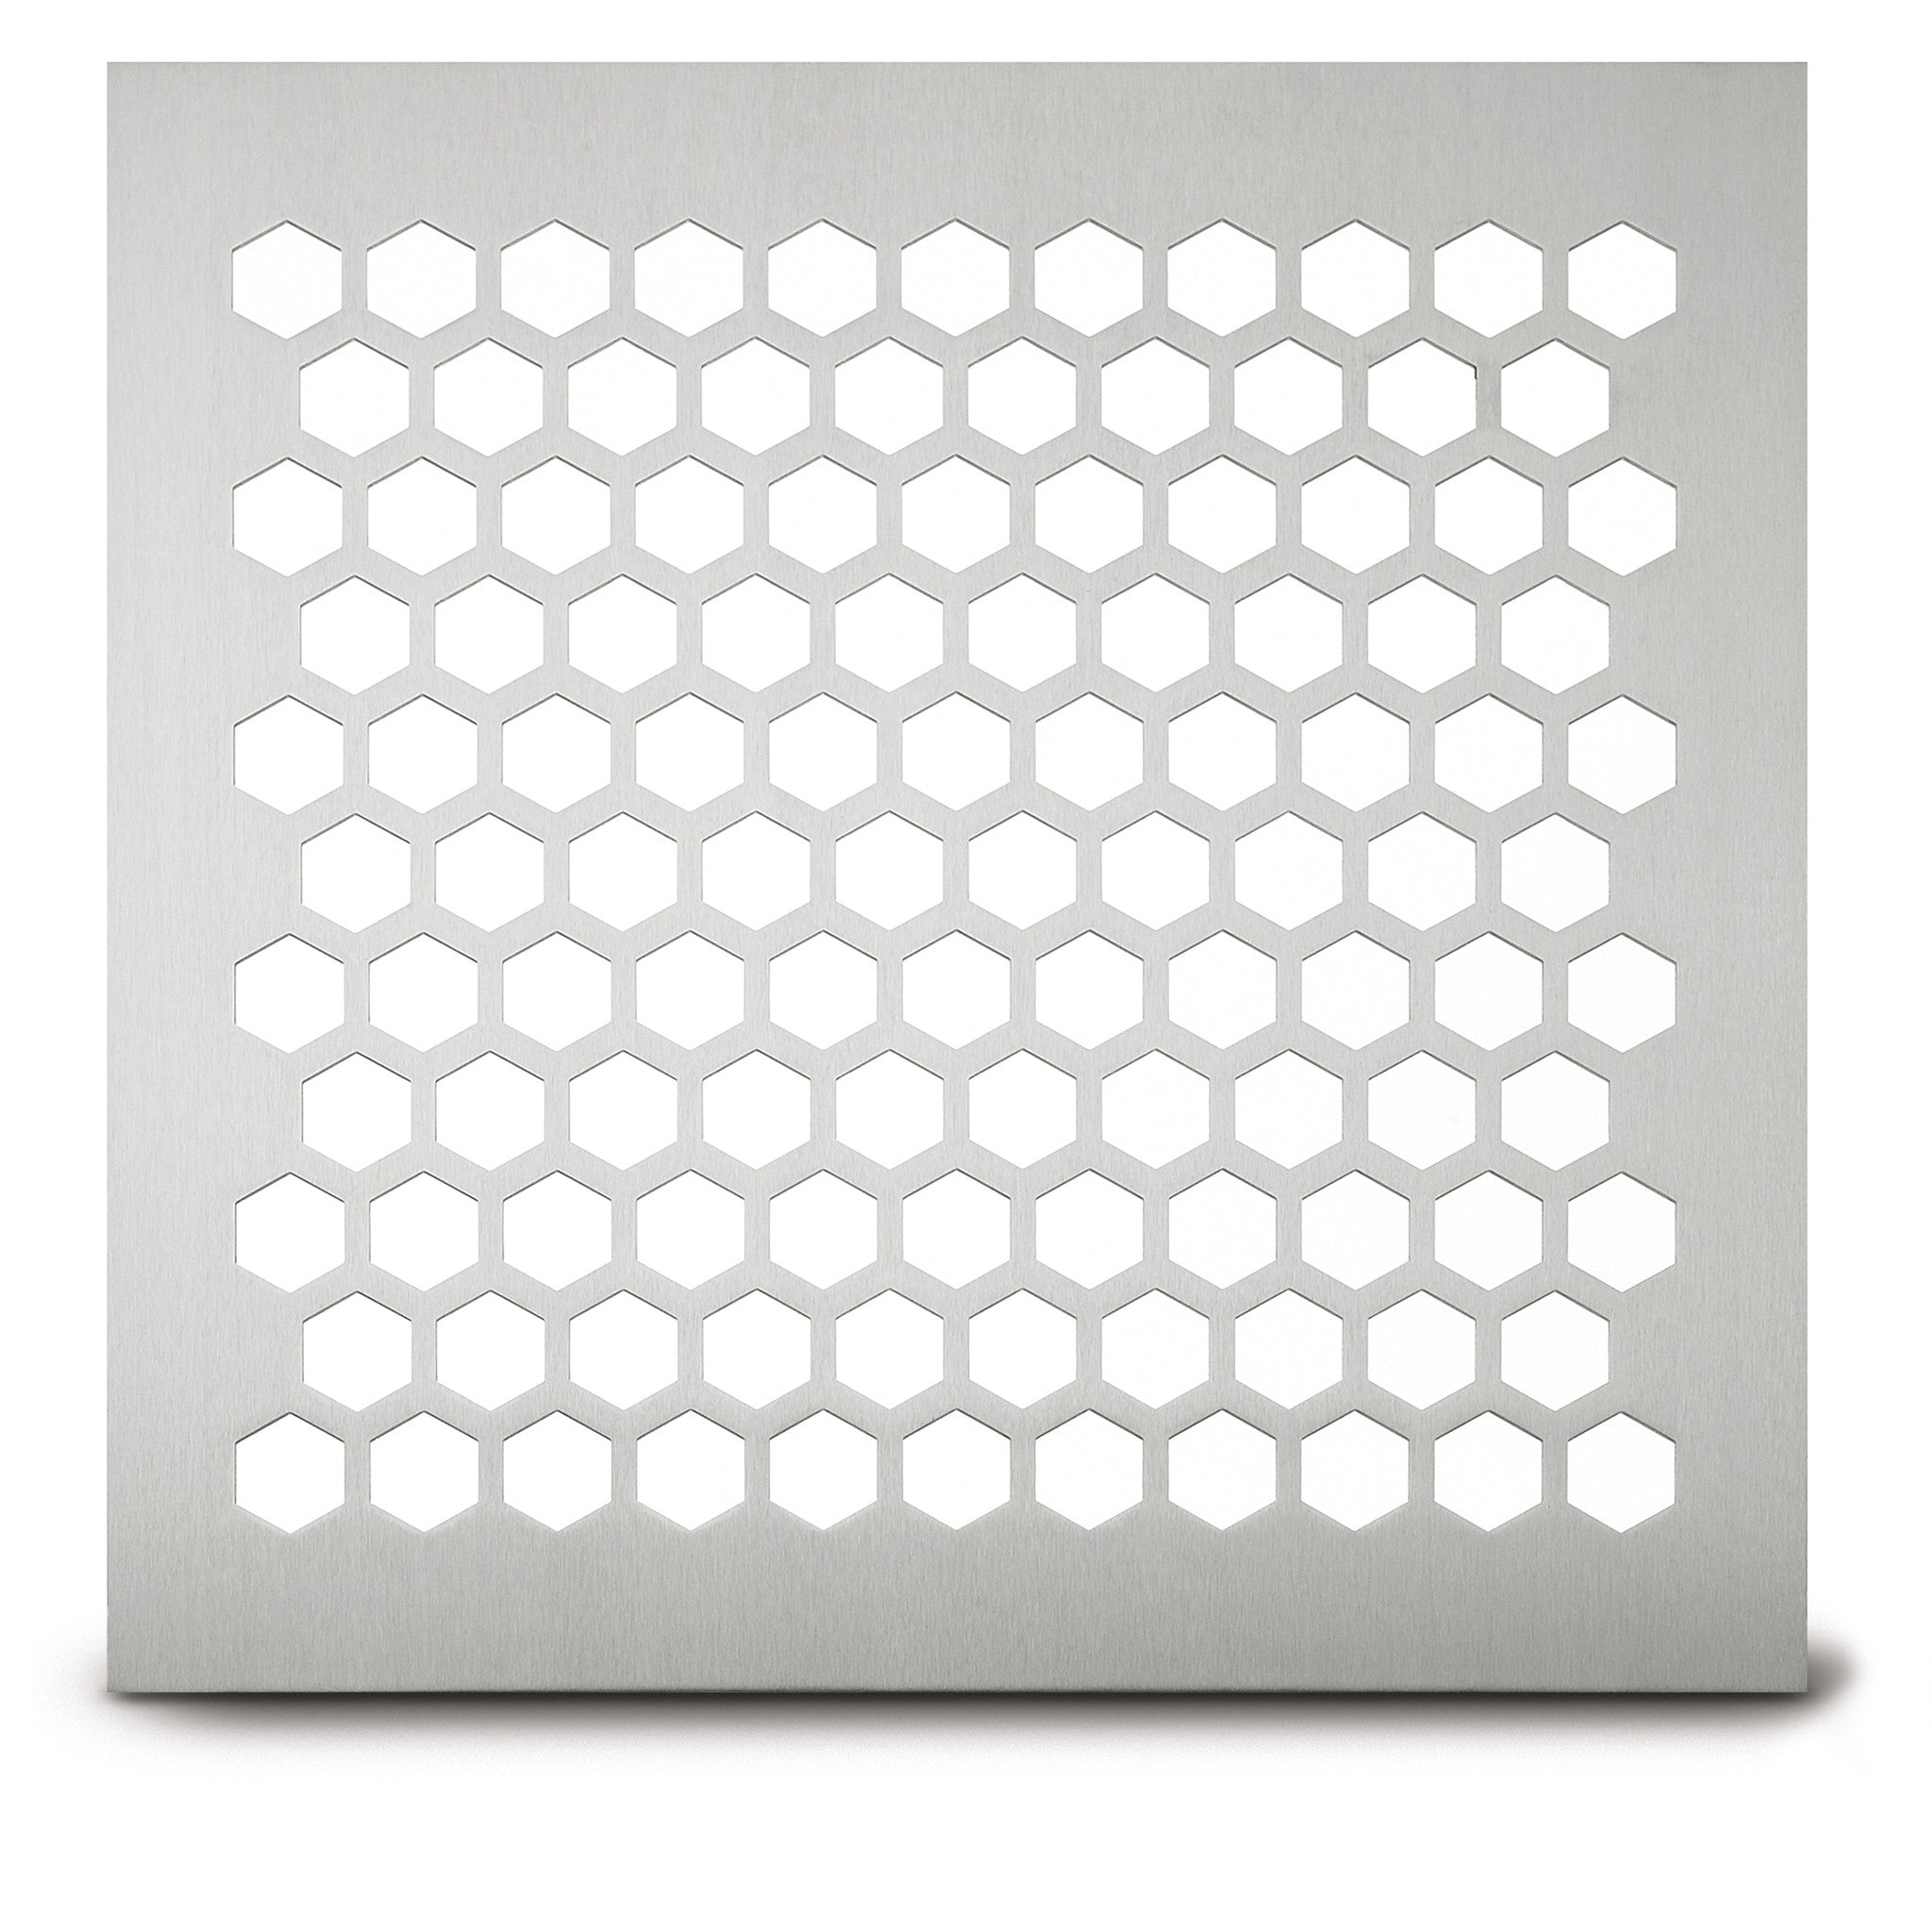 203 Honeycomb Perforated Grille: ¾” pattern - 50% open area